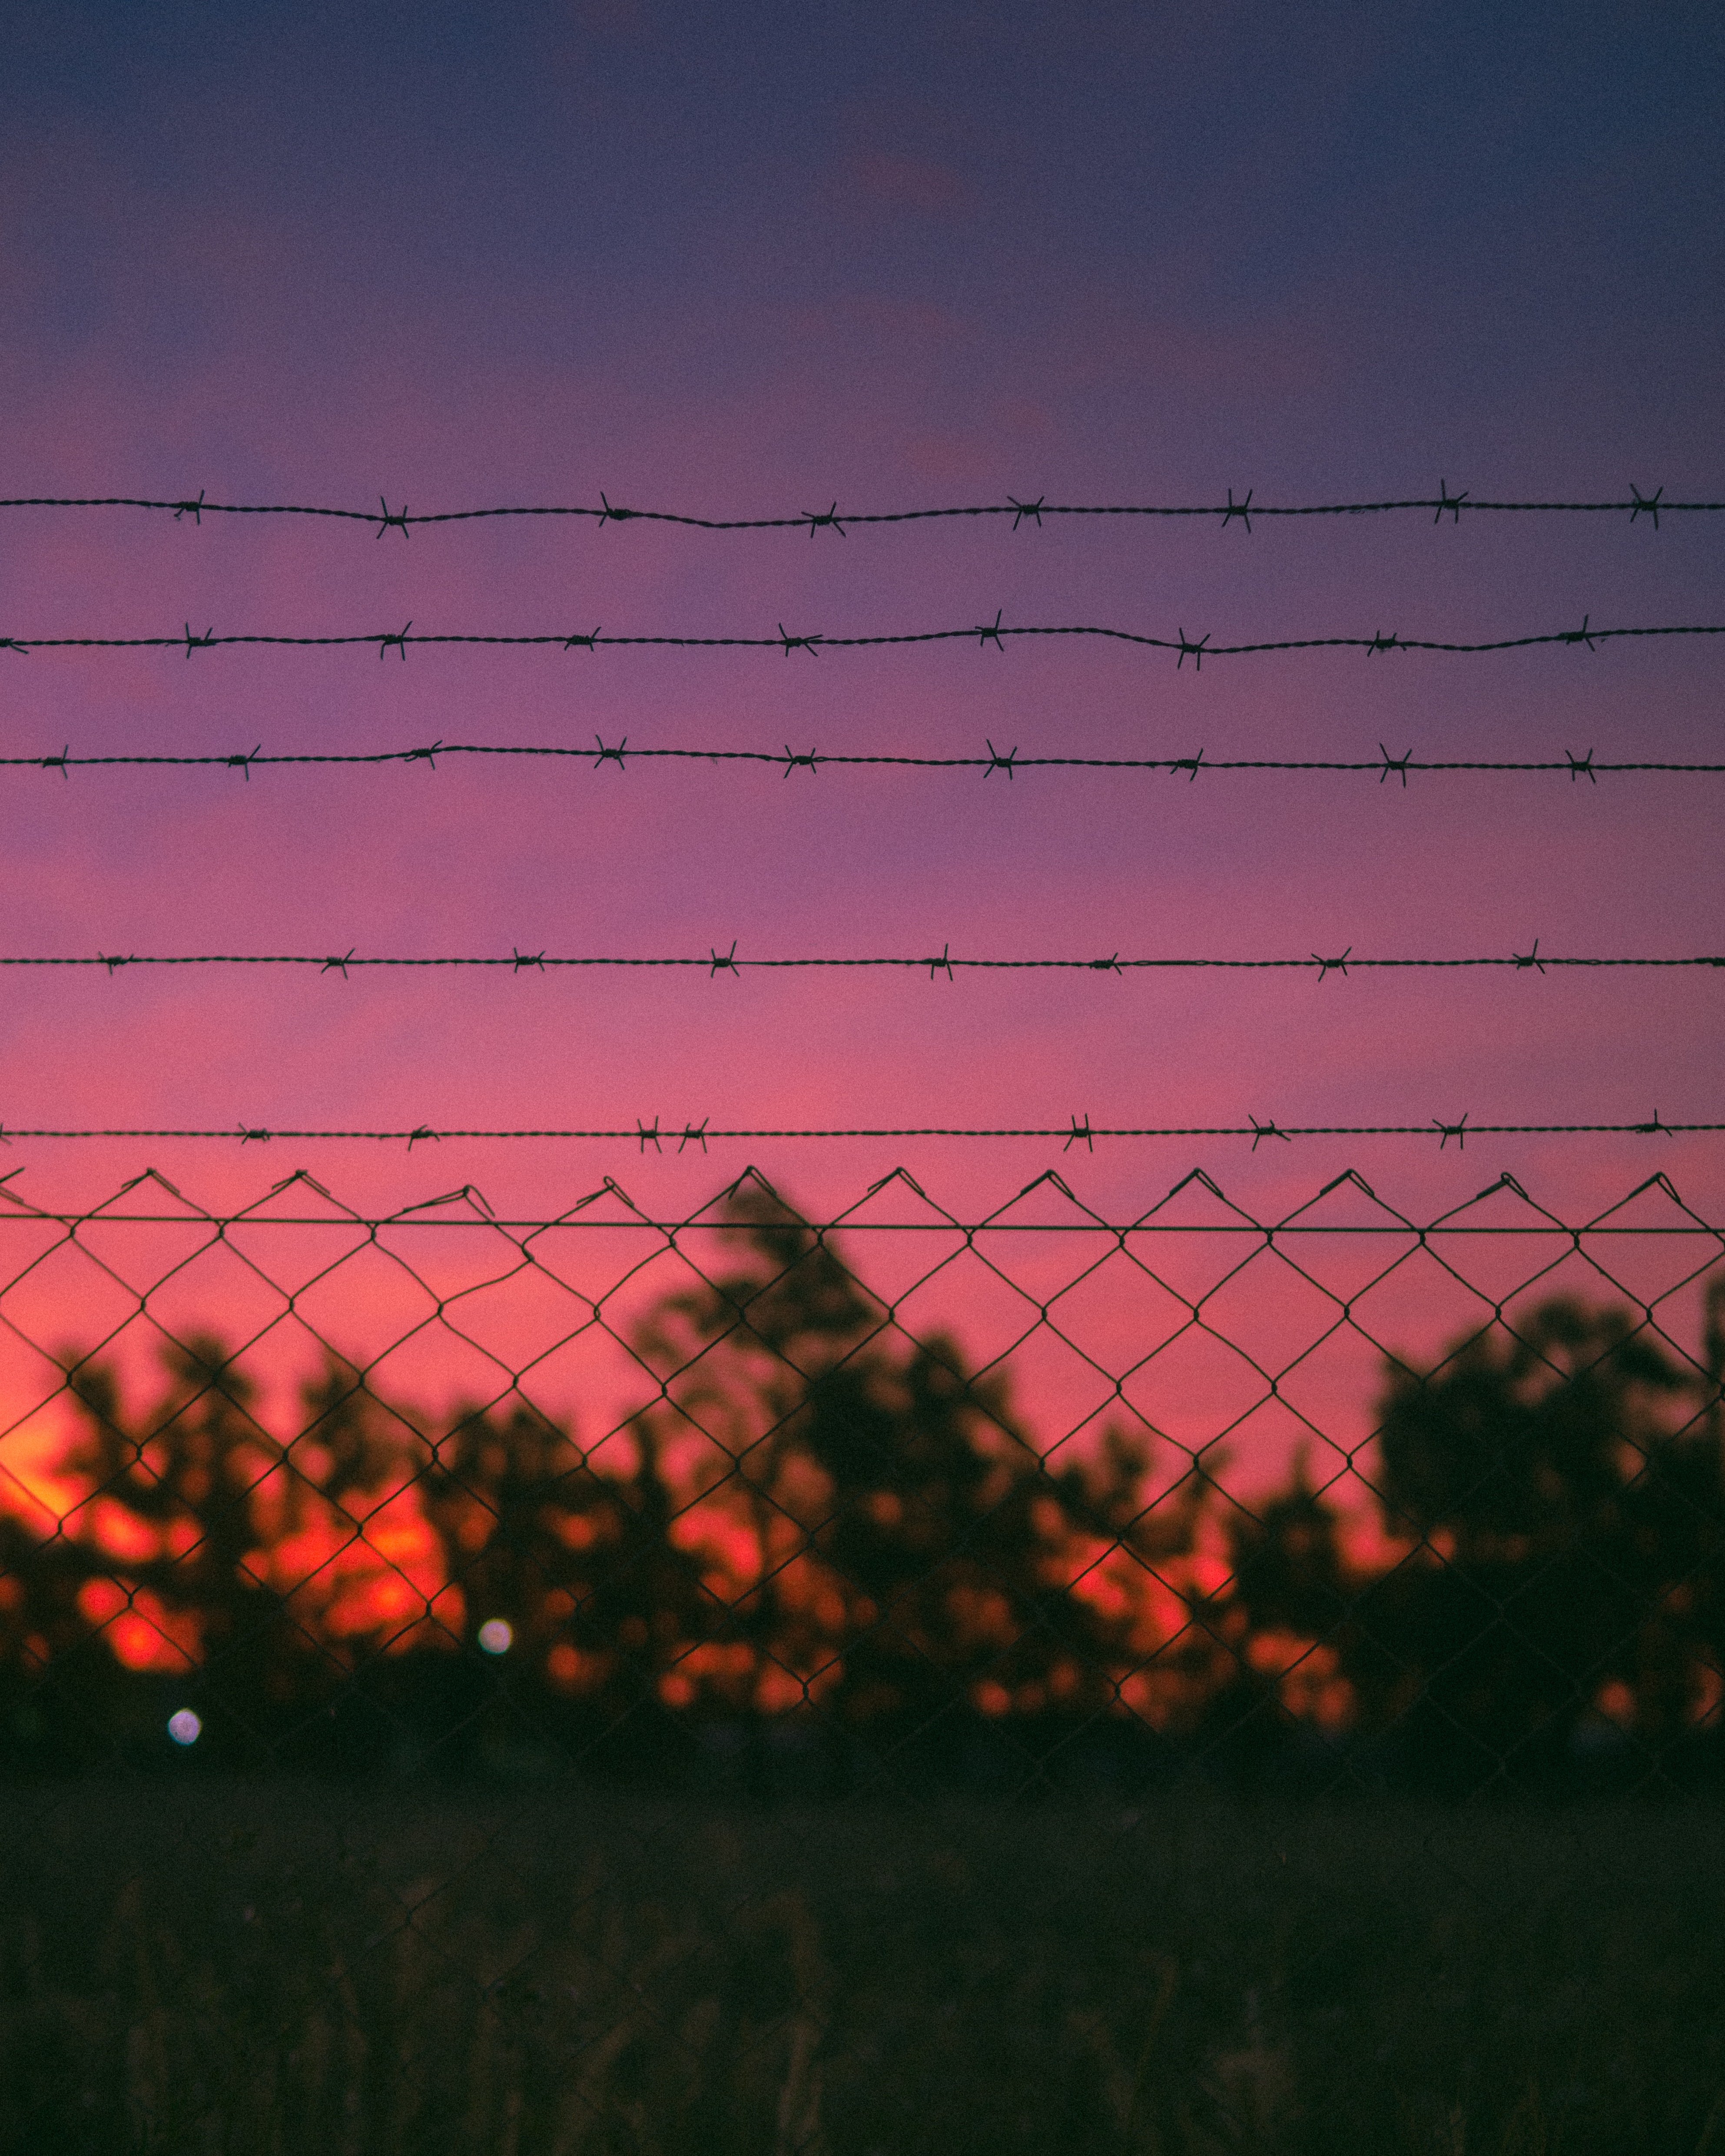 metallic, nature, sunset, metal, wire, barbed wire